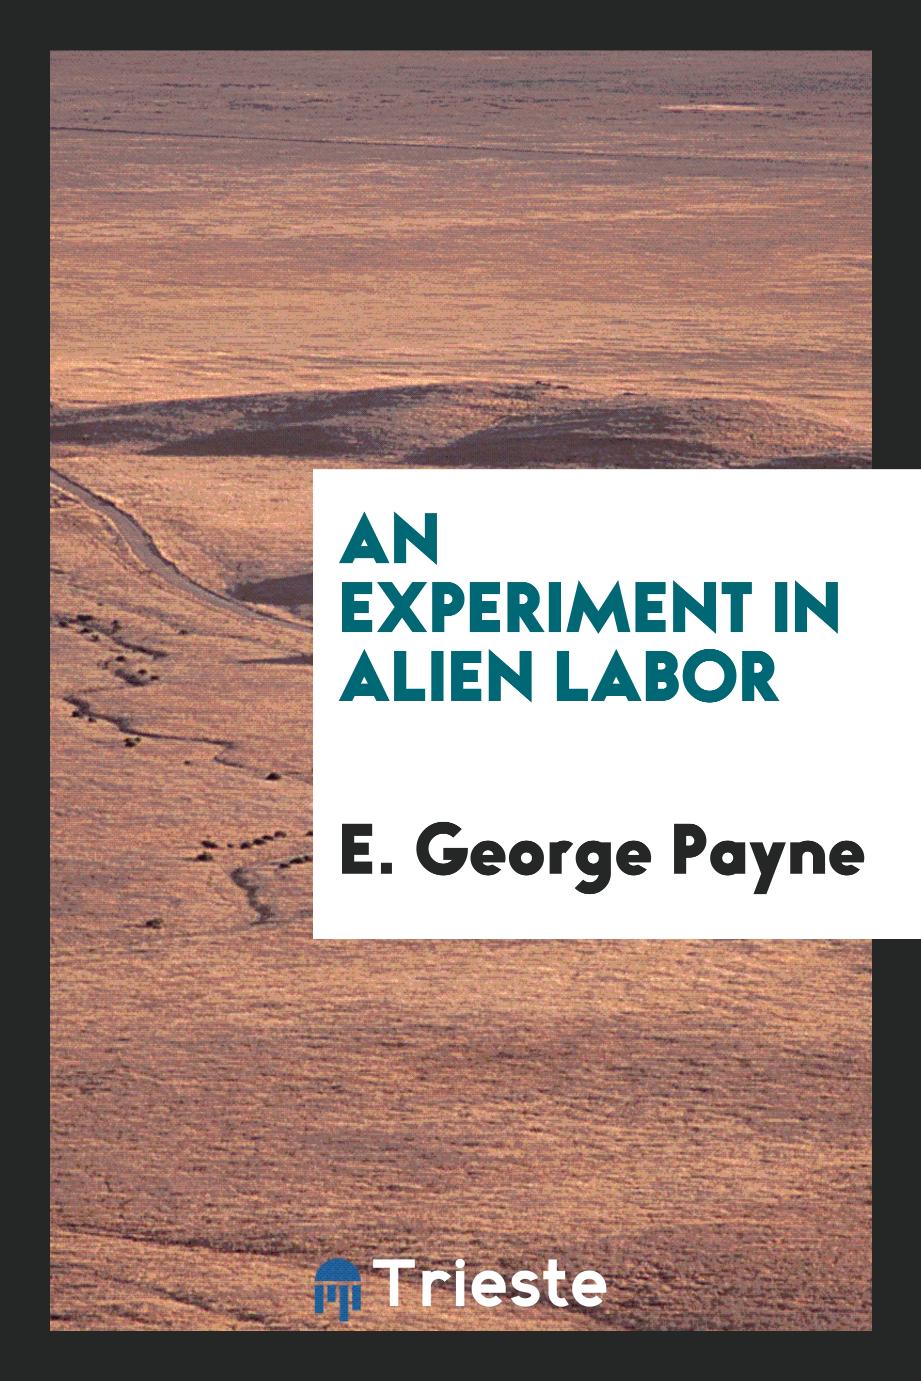 An Experiment in Alien Labor